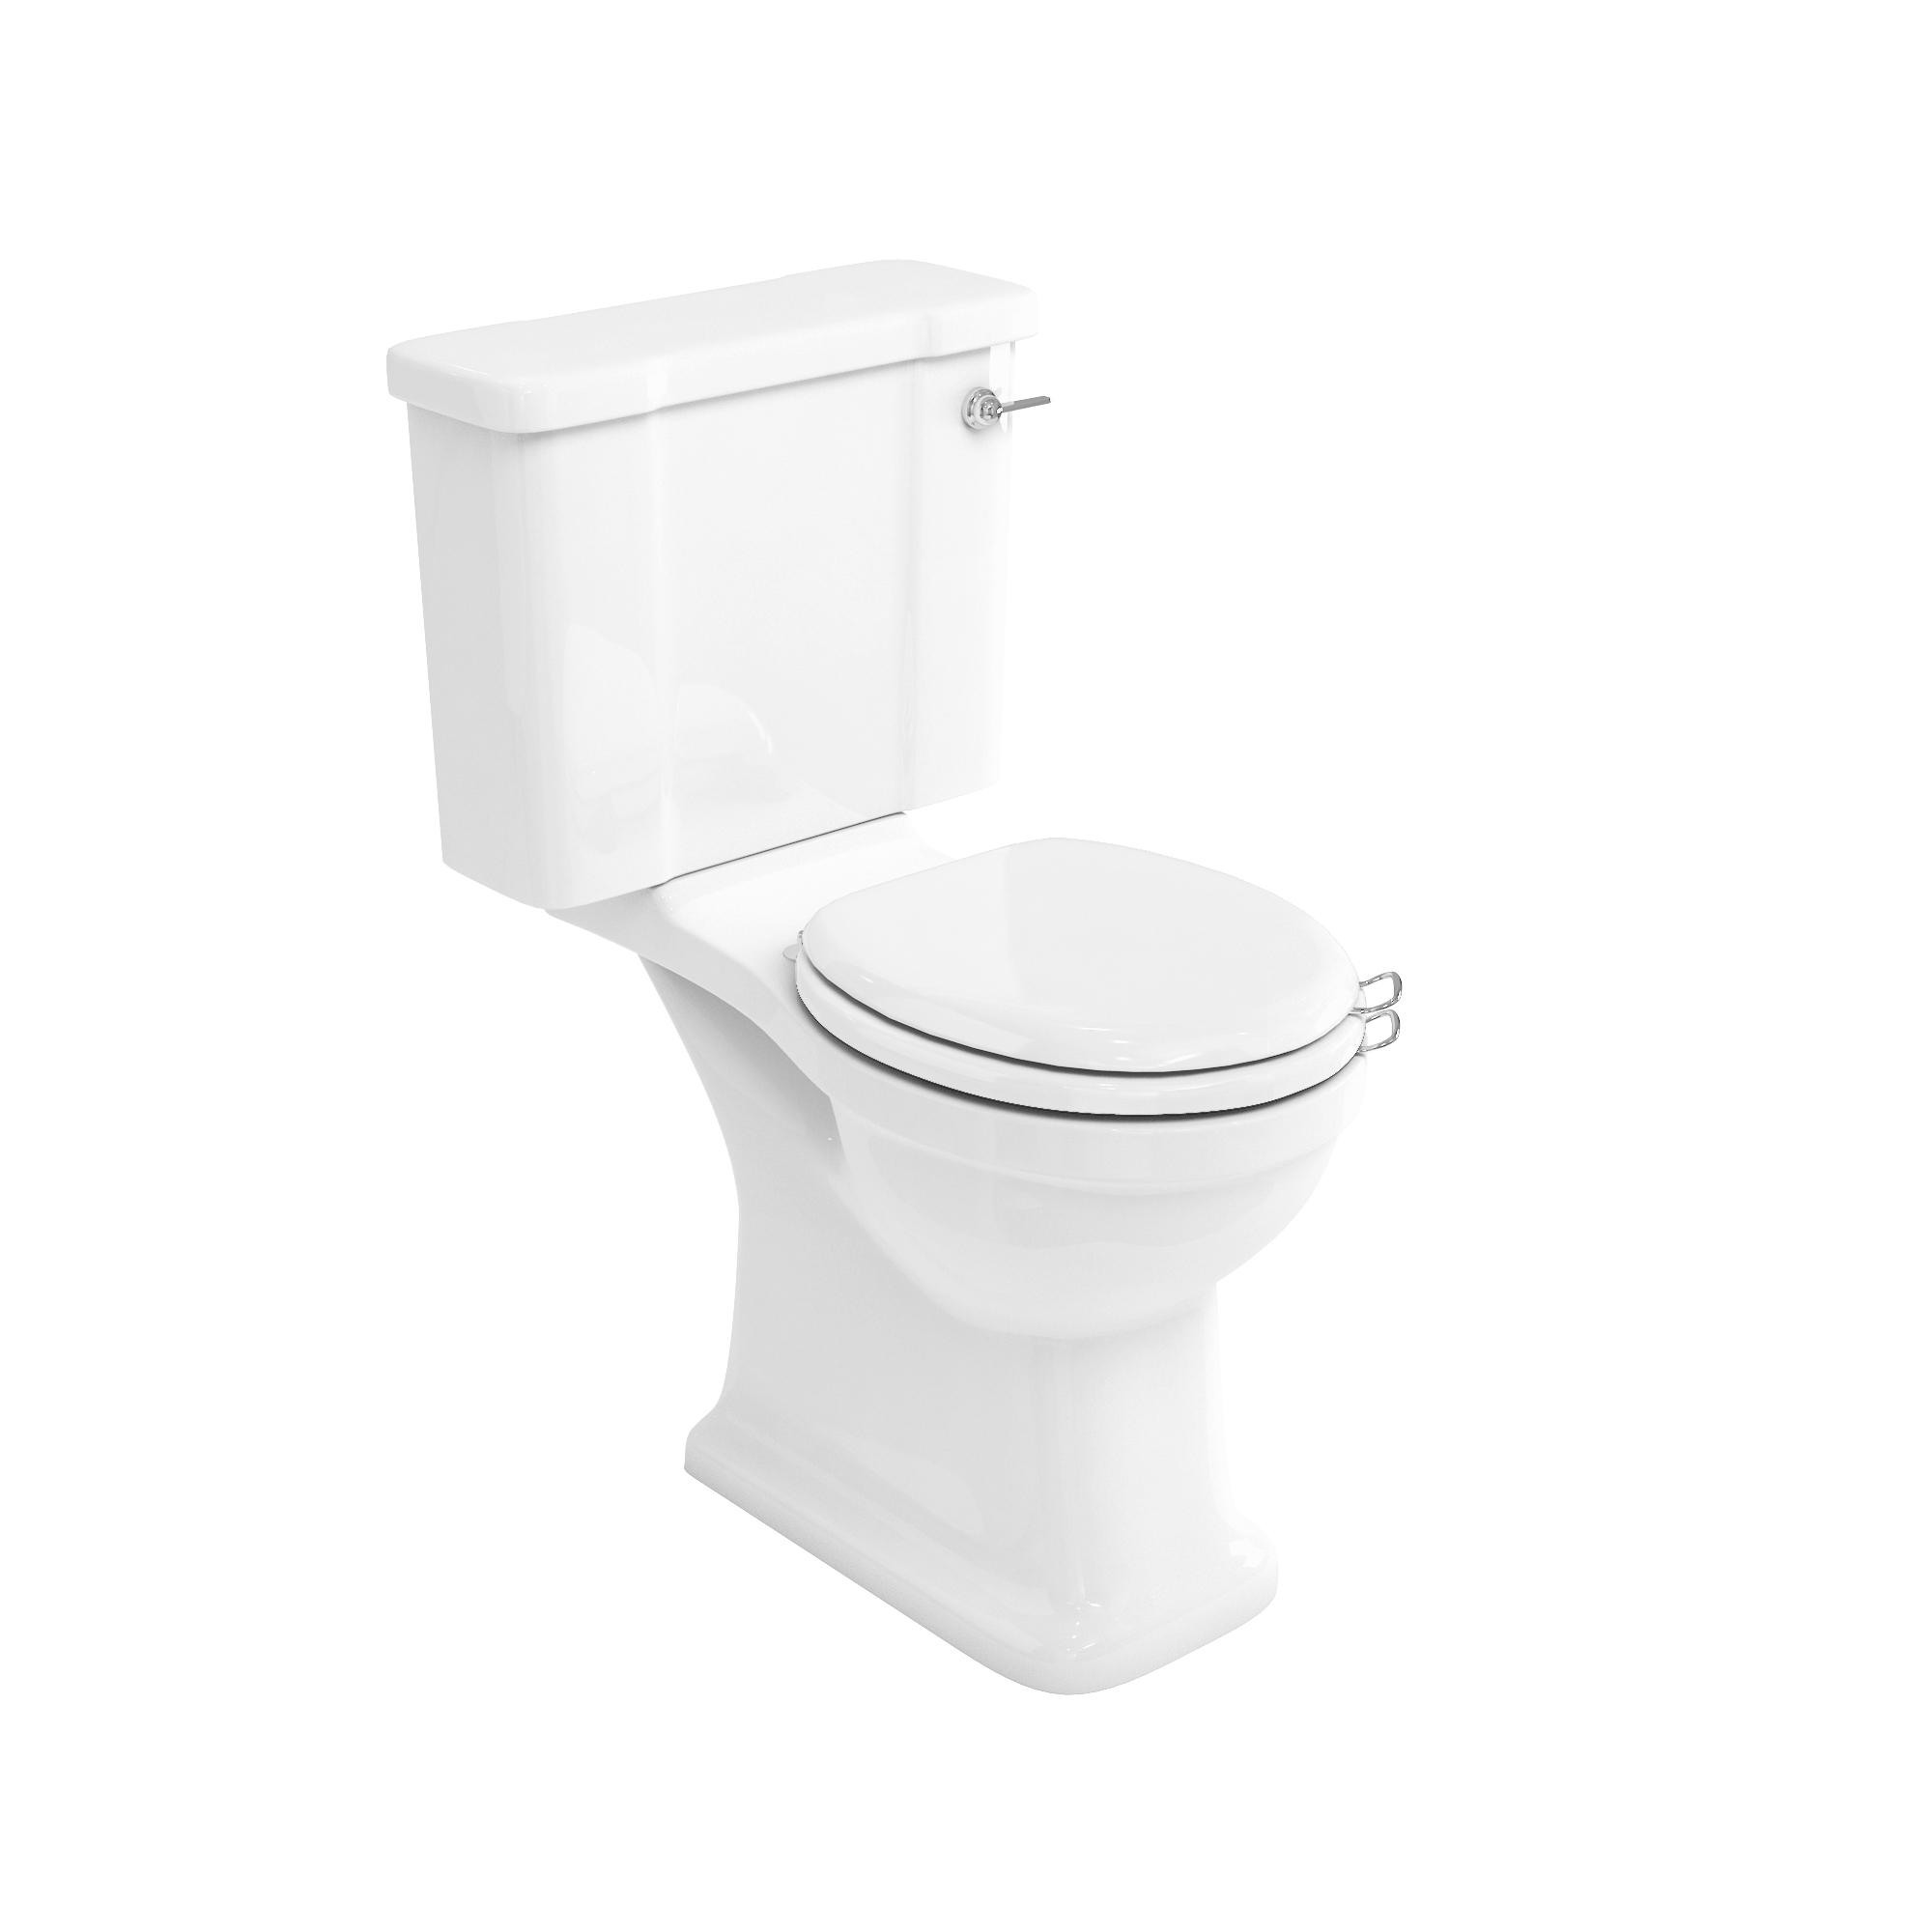 Arcade Open back close-coupled pan and dual flush cistern - chrome